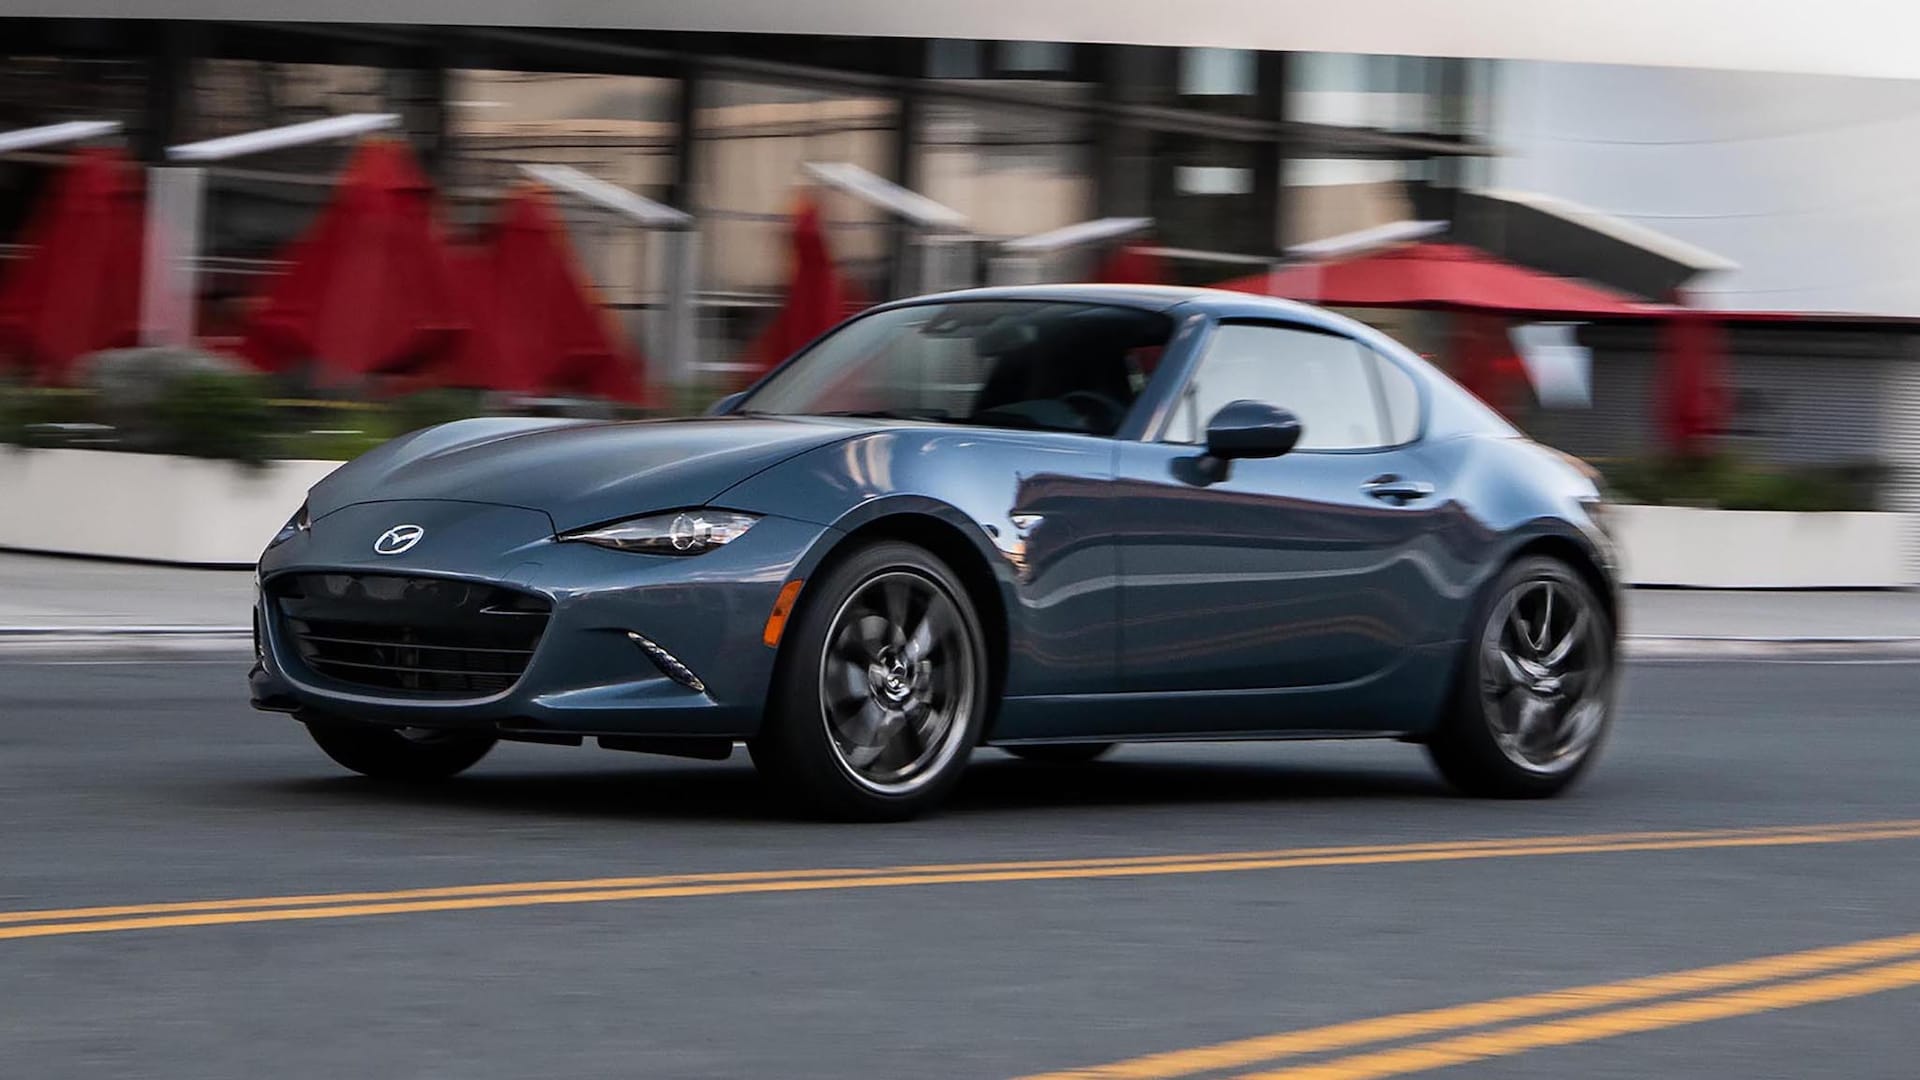 2023 Mazda Car Lineup Changes: What's New With the 3 and MX-5 Miata